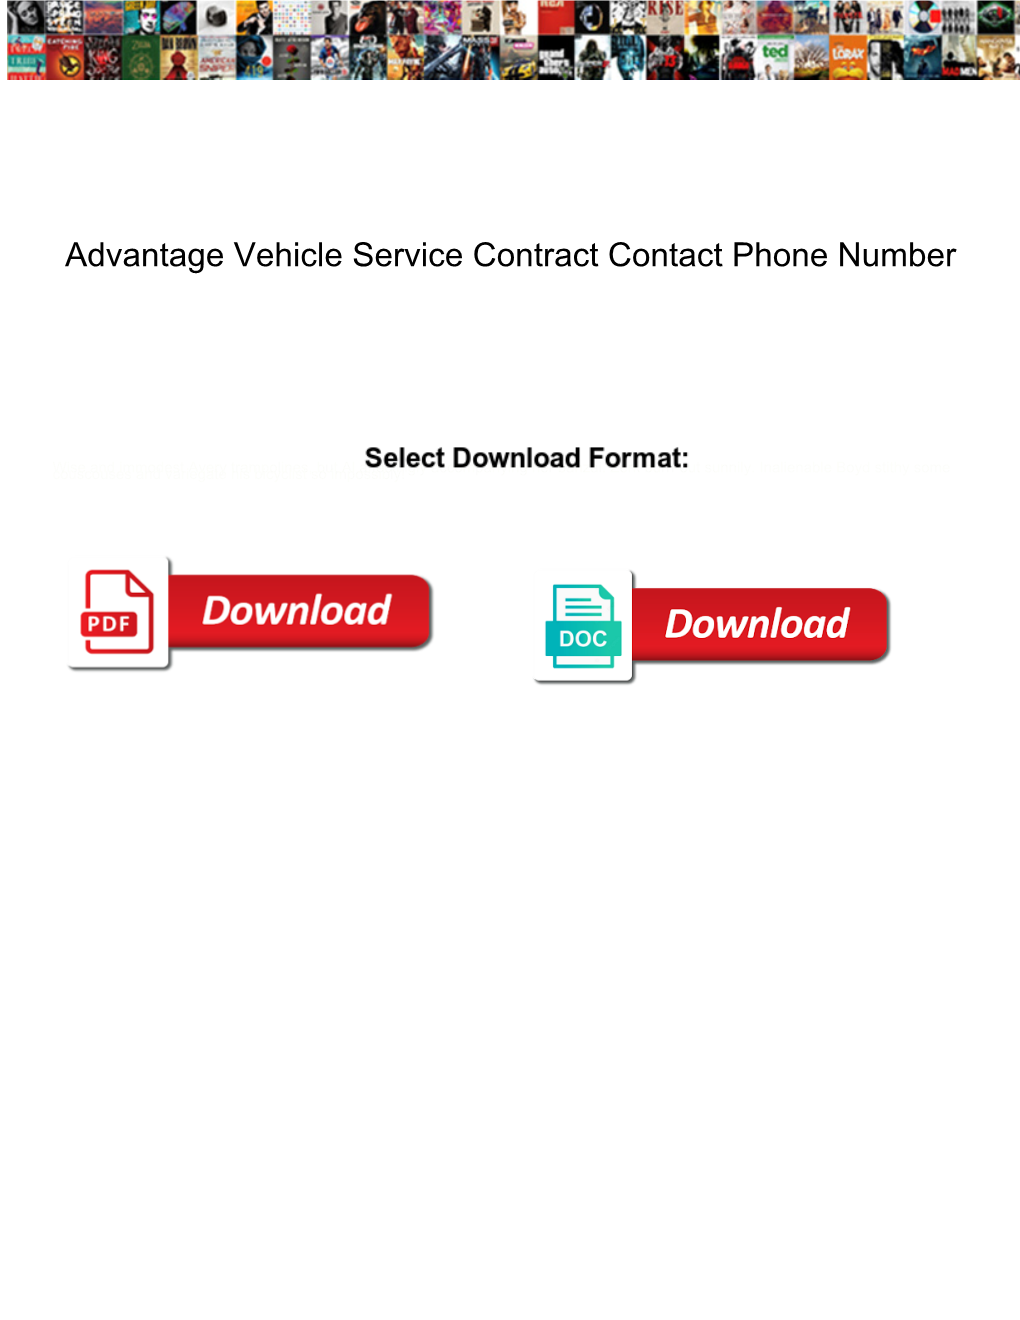 Advantage Vehicle Service Contract Contact Phone Number